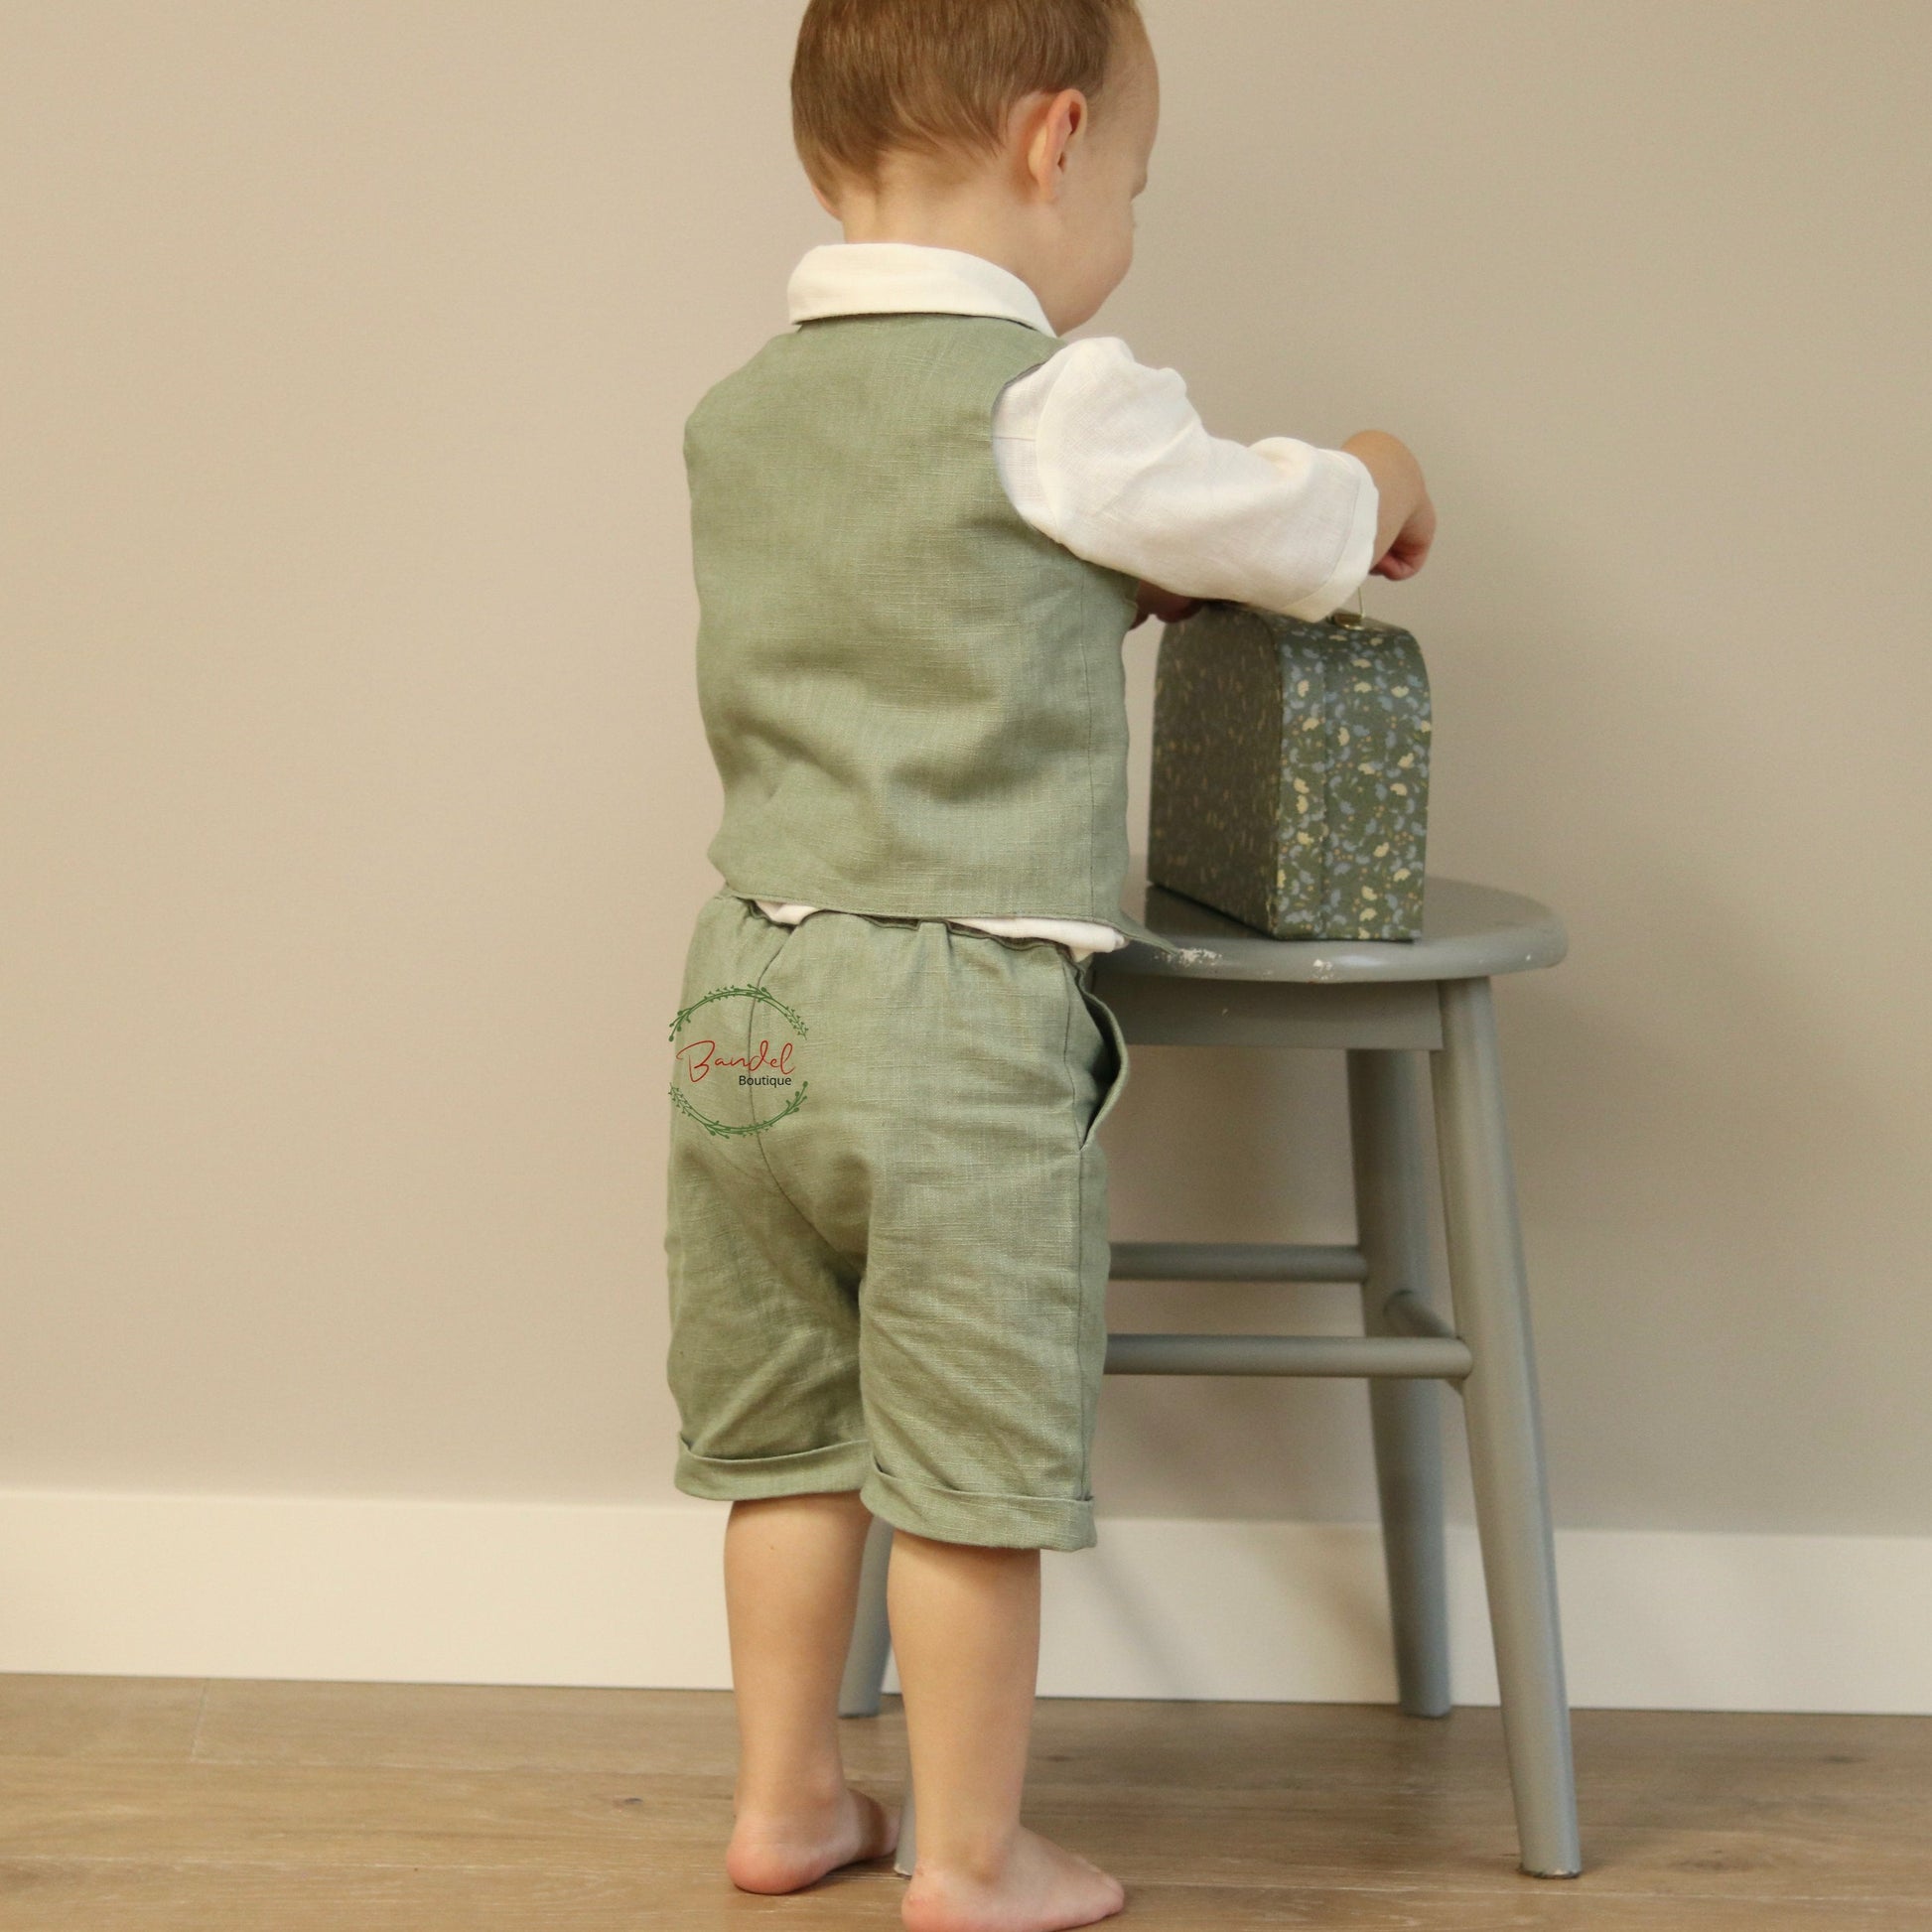 This Dark-Mint Pageboy outfit features a short and vest tailored with elasticized back waistband and front wooden buttons, and an ivory shirt with a collar and 3/4-length sleeves. Its classic design ensures a comfortable fit with two side pockets for maximum convenience.